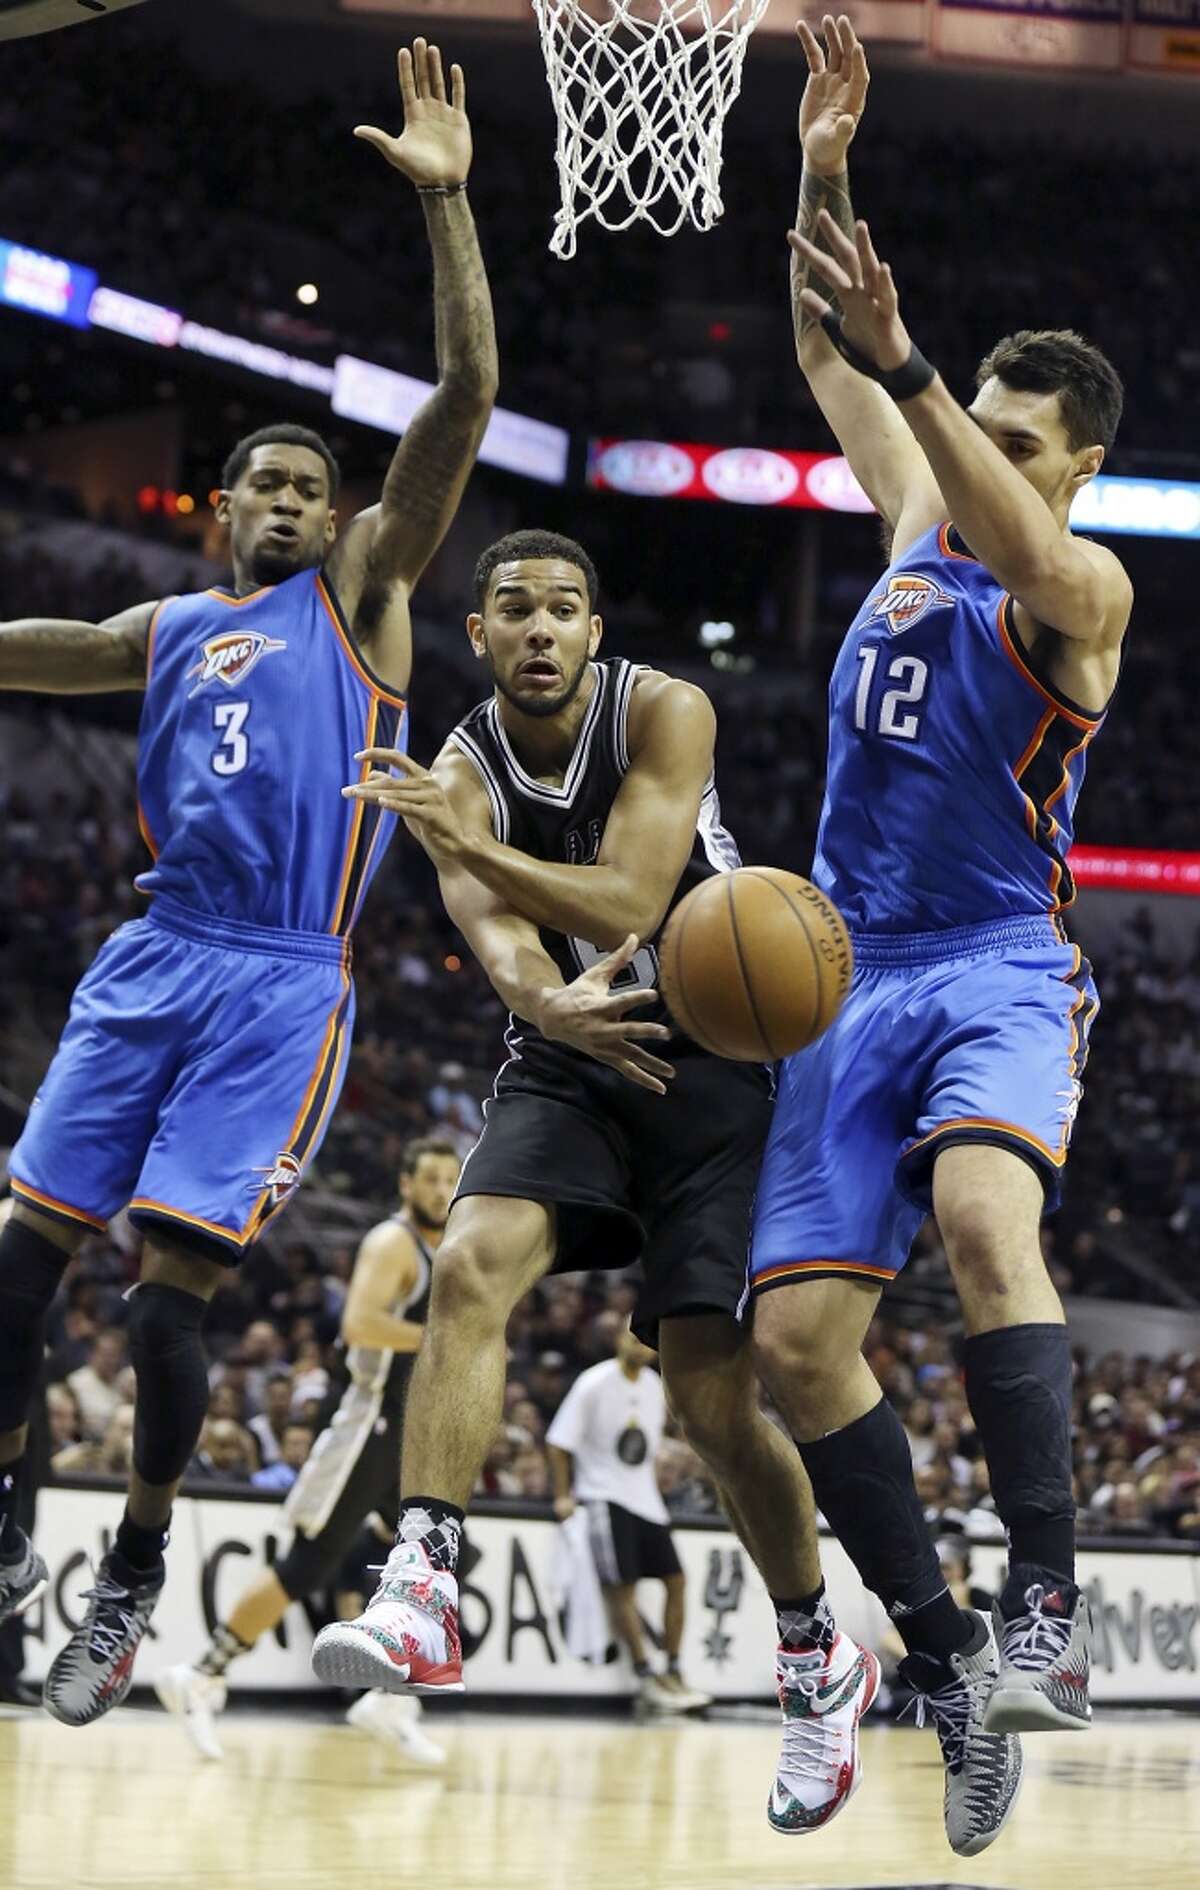 San Antonio Spurs' Cory Joseph passes between Oklahoma City Thunder's Perry Jones (left) and Steven Adams during first half action Thursday Dec. 25, 2014 at the AT&T Center.